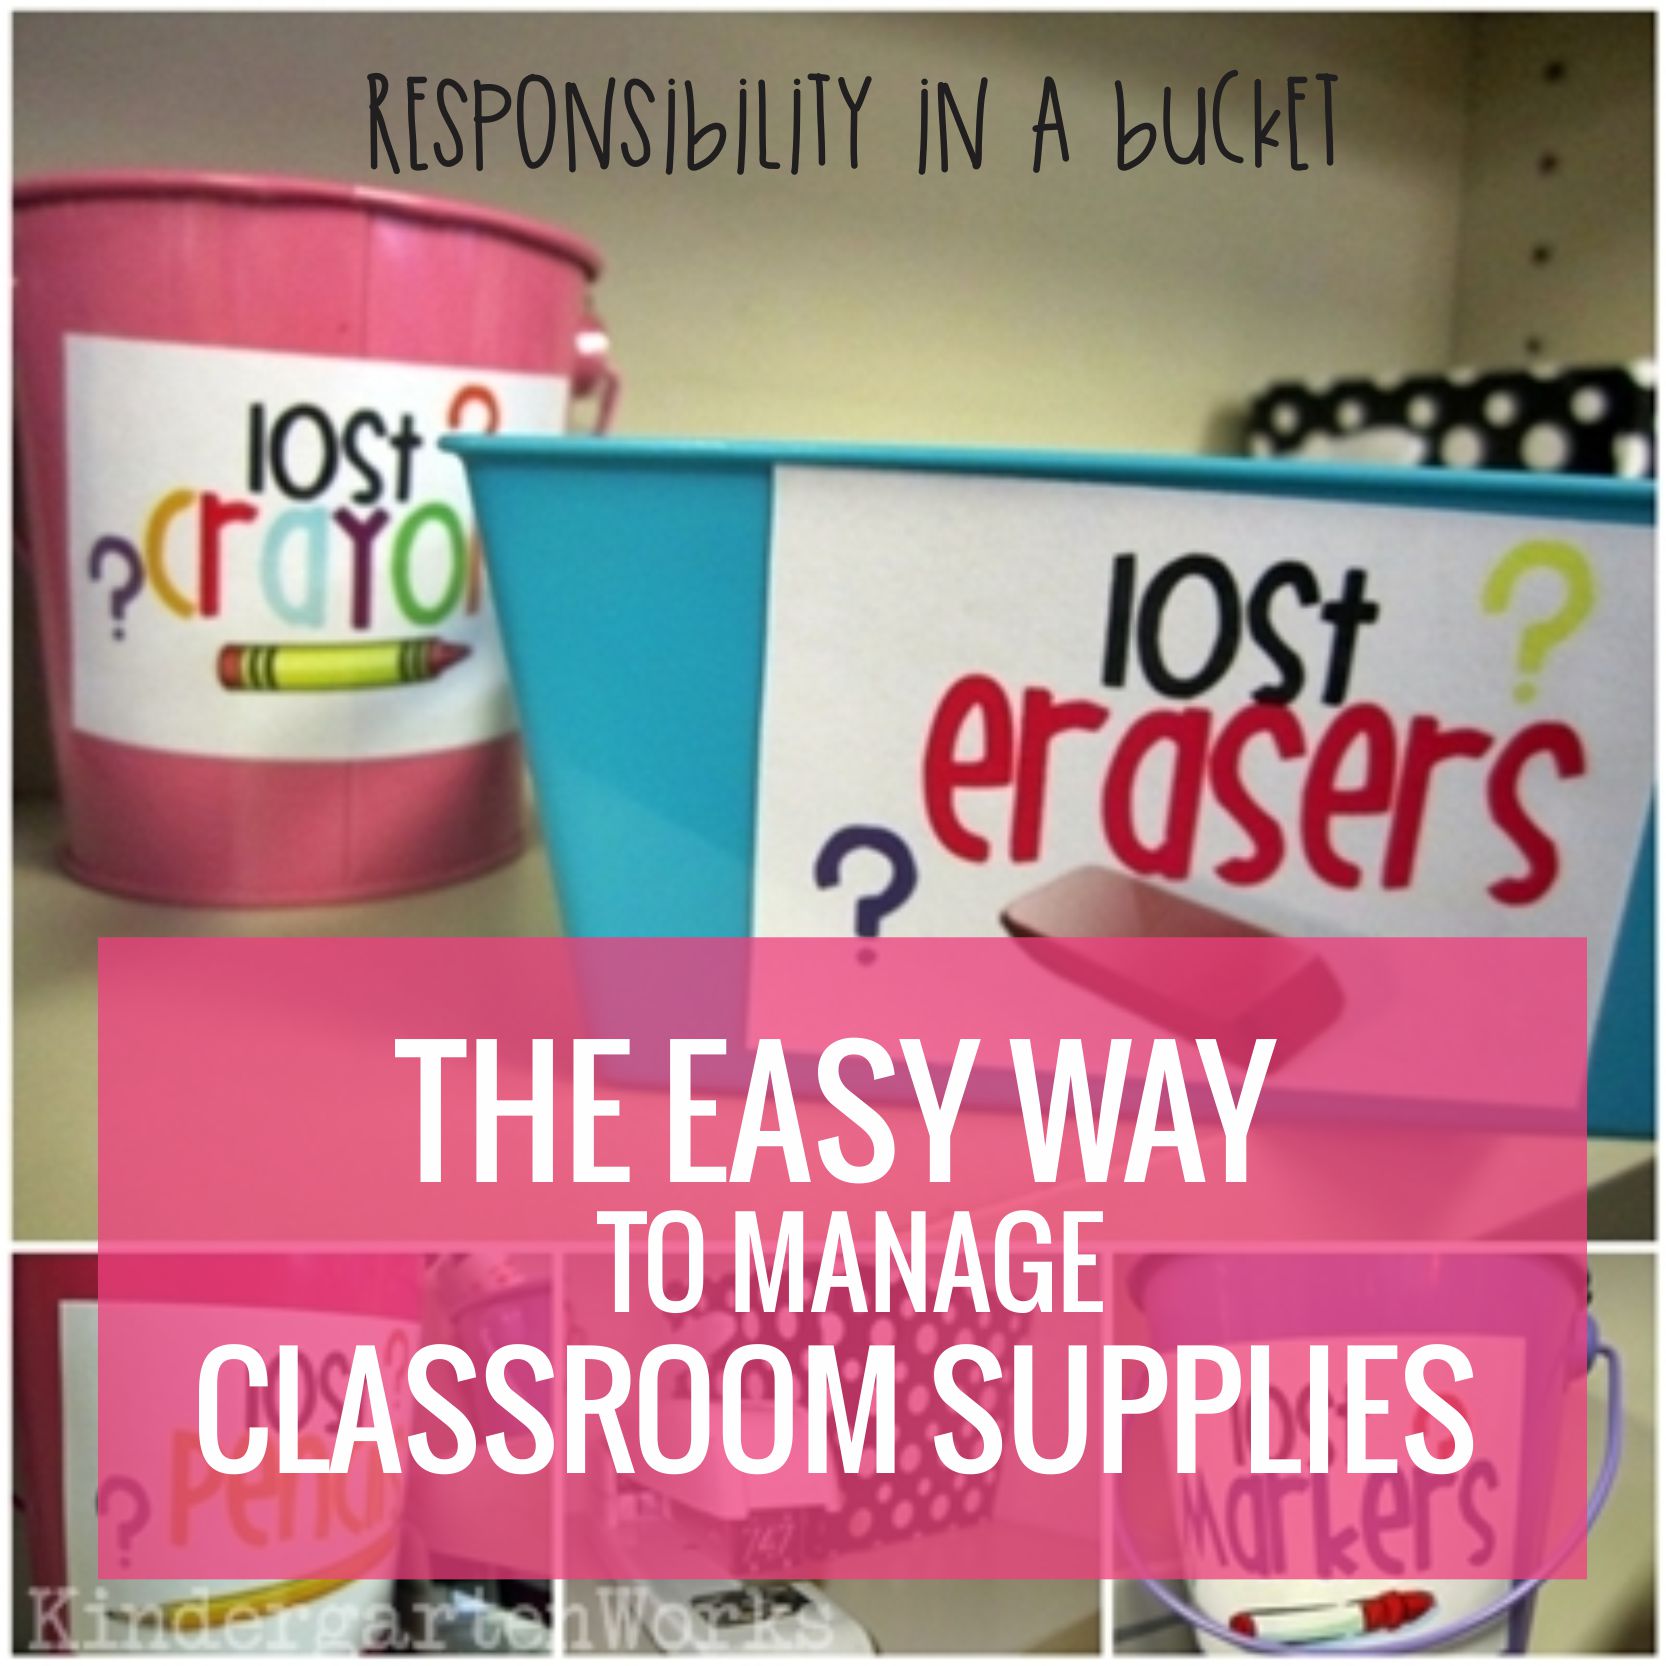 The EASY way to organize classroom supplies - it's like responsibility in a bucket